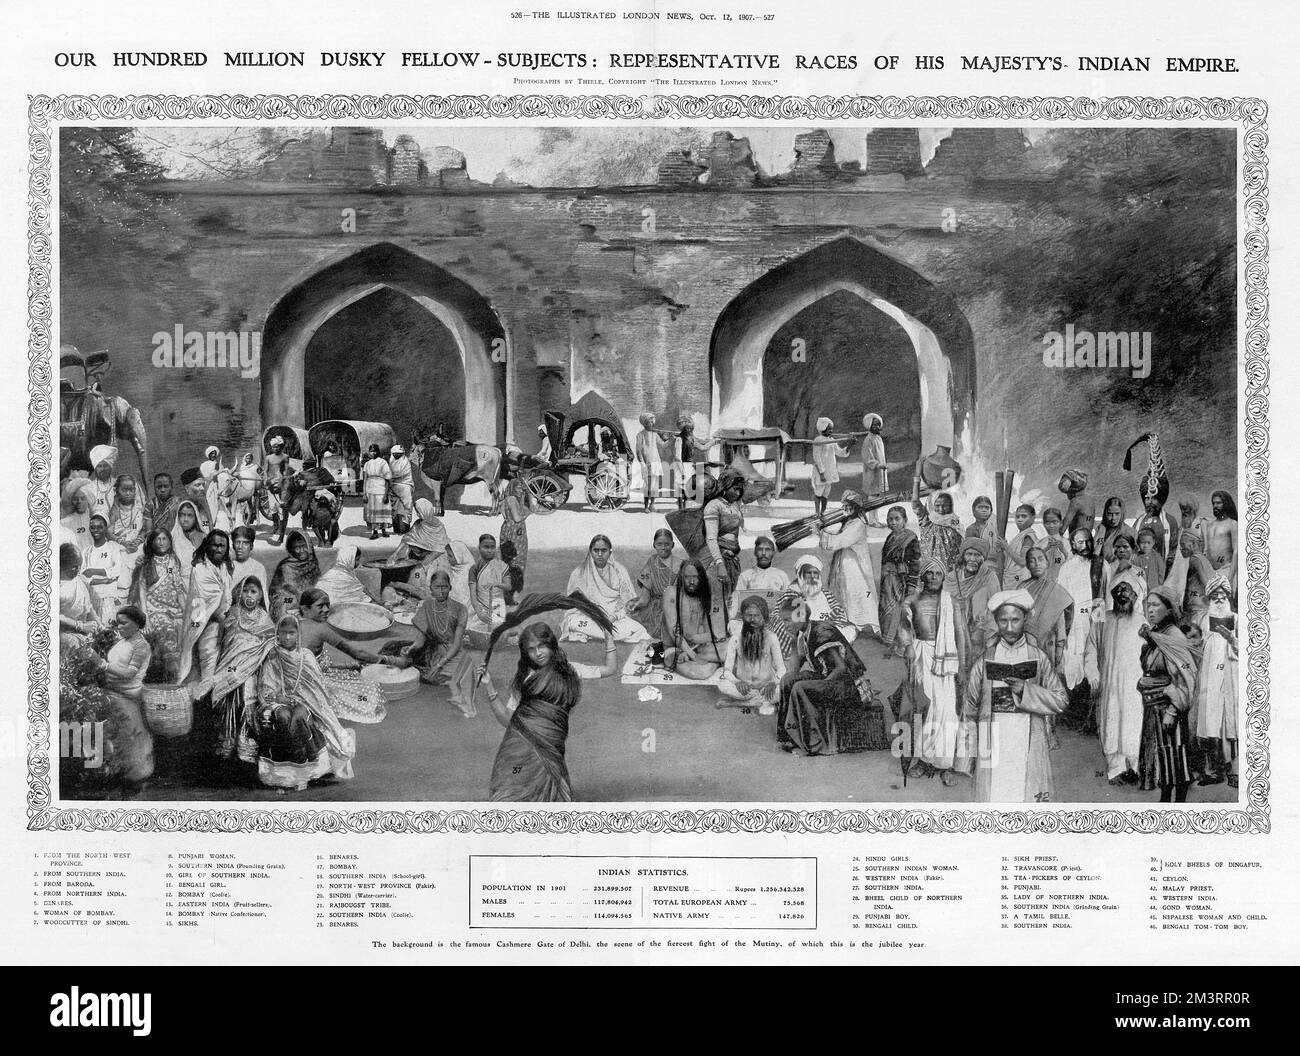 'Our Hundred Million Dusky Fellow-Subjects':  Representative Races of His Majesty's Indian Empire.  Photograph diagram representing the different regions and sub-cultures in India in 1907 at the height of the British Empire.  The background is the famous Cashmere Gate of Delhi, the scene of the fiercest fighting during the Indian Mutiny.     Date: 1907 Stock Photo